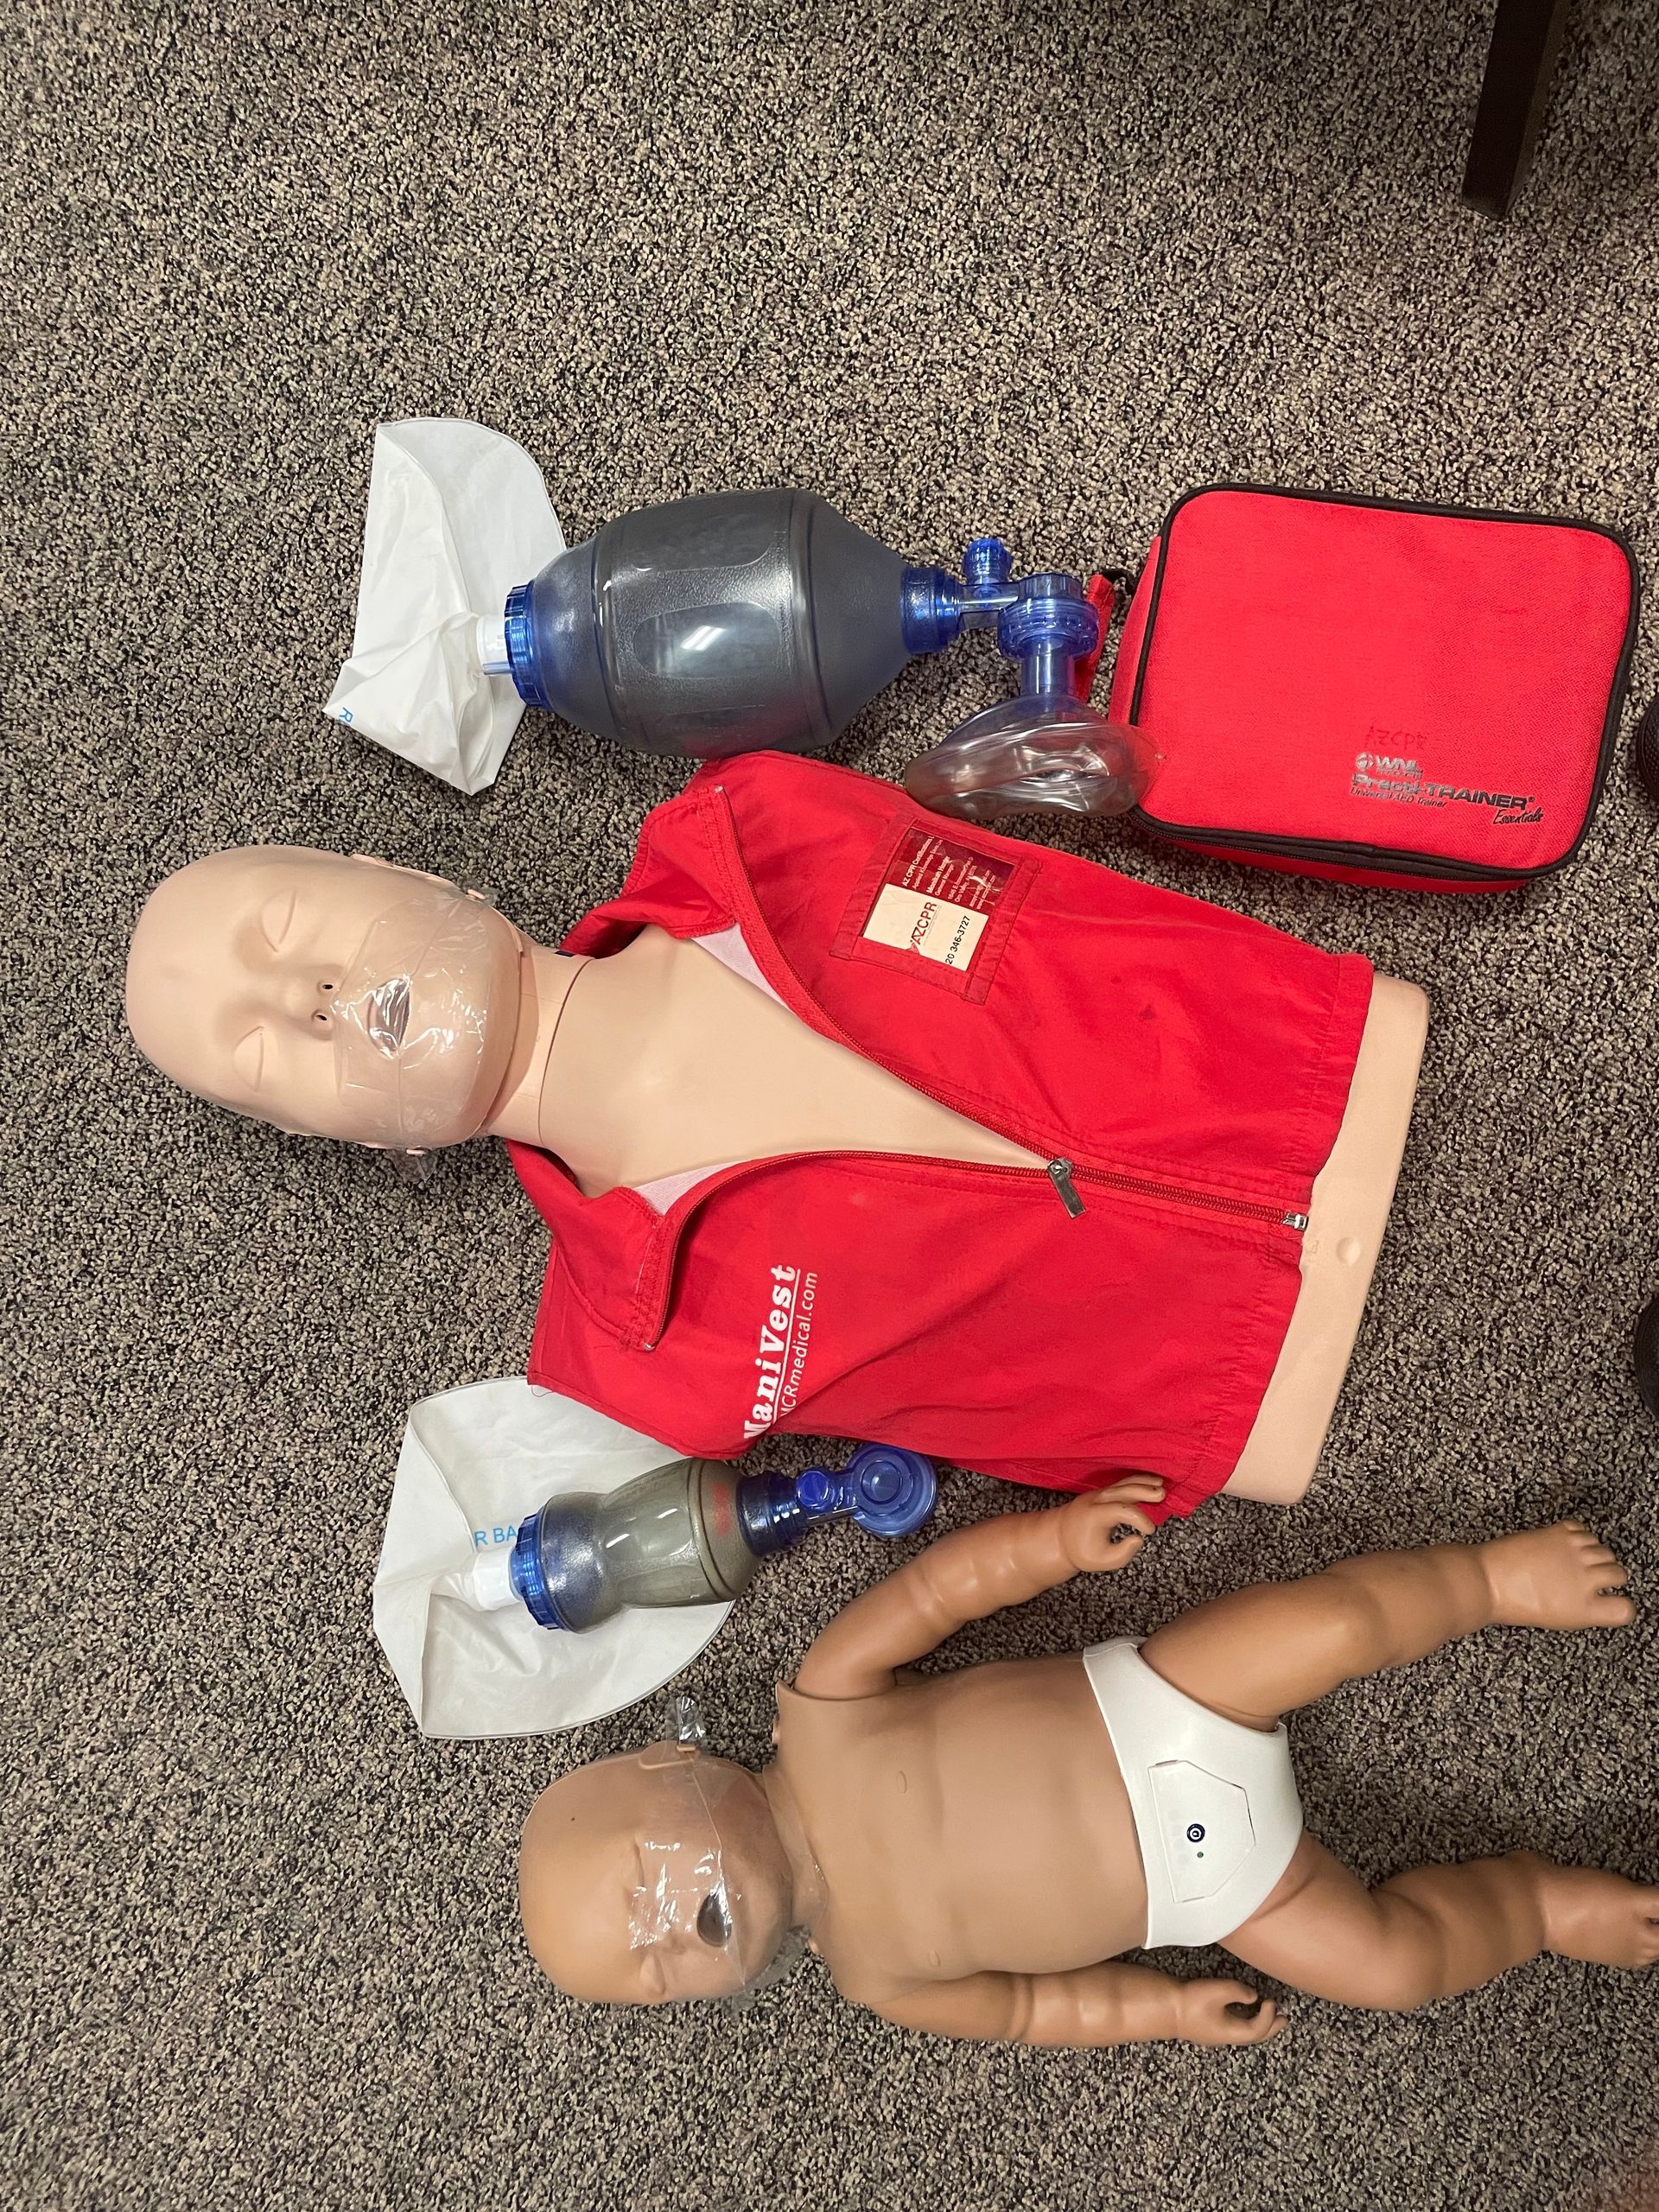 CPR/AED Training